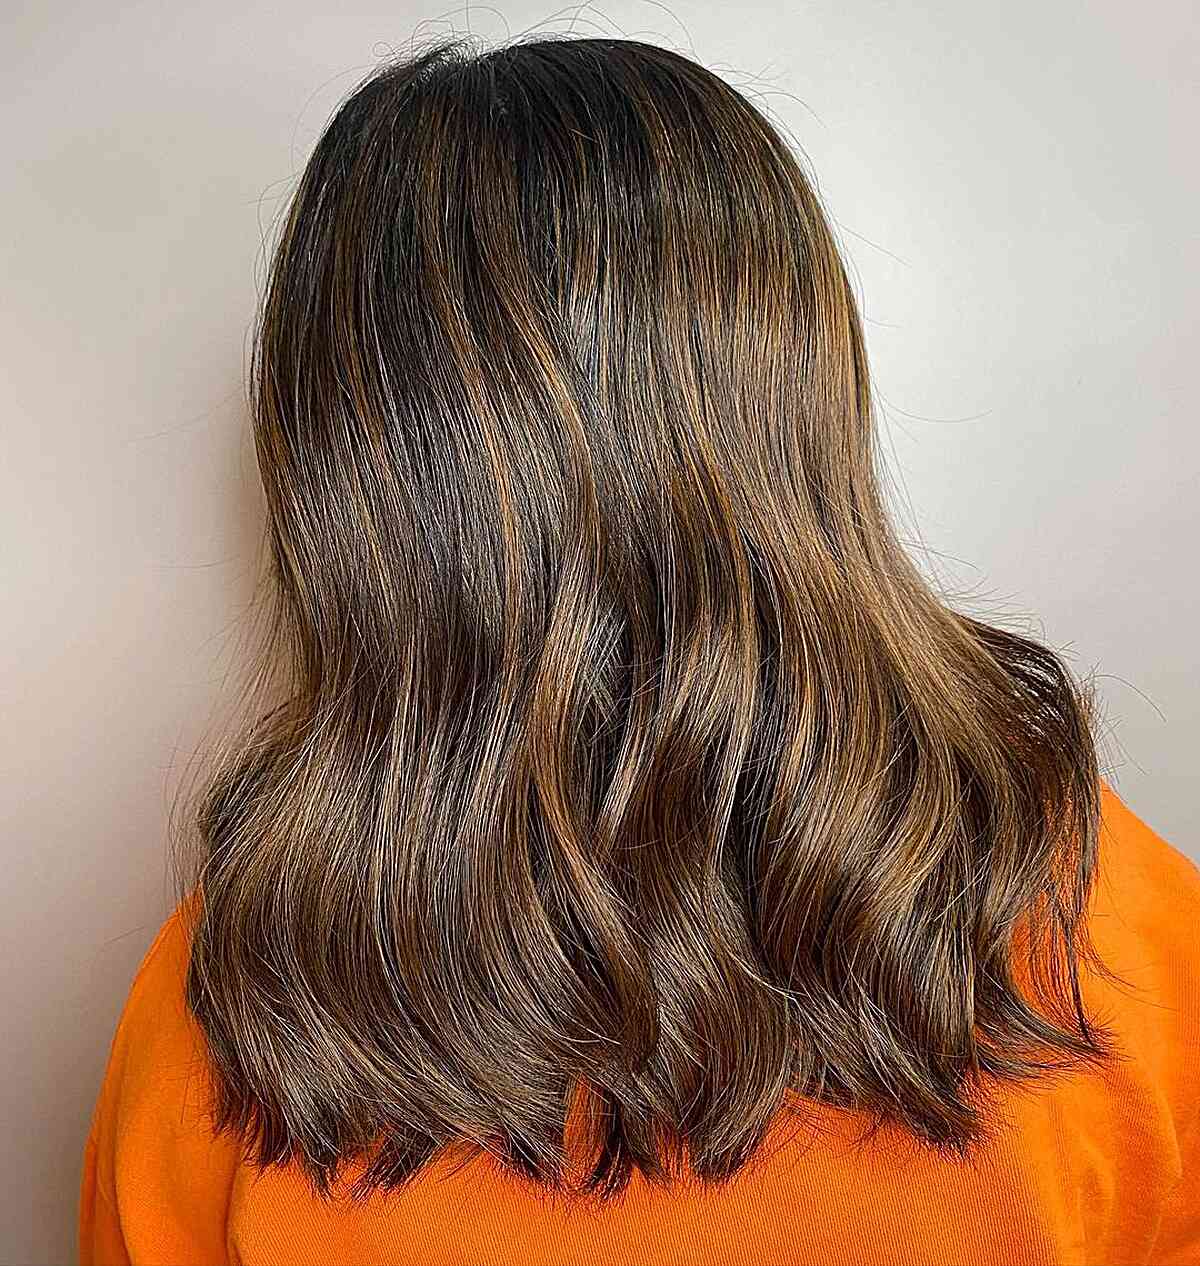 Dusted Cut for Mid-Length Smooth Brown Hair